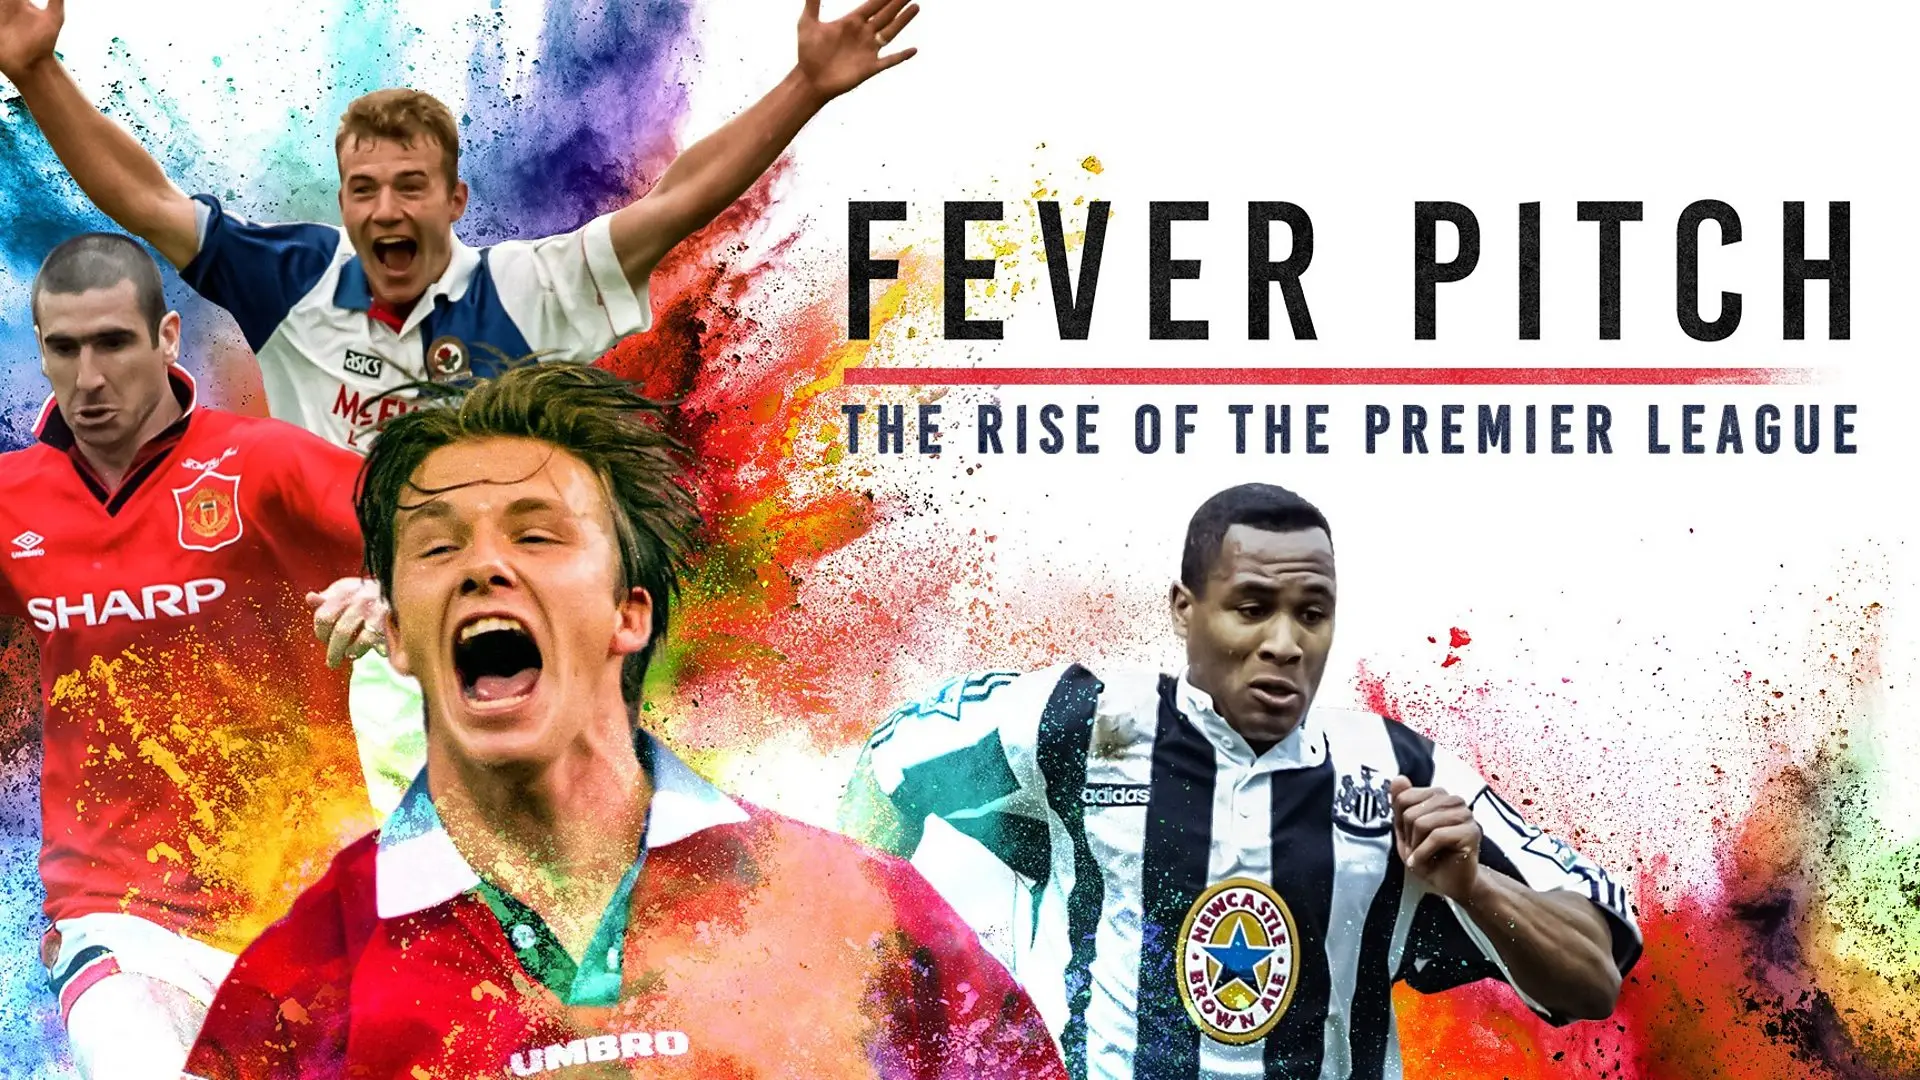 Where to watch Fever Pitch The Rise of the Premier League online